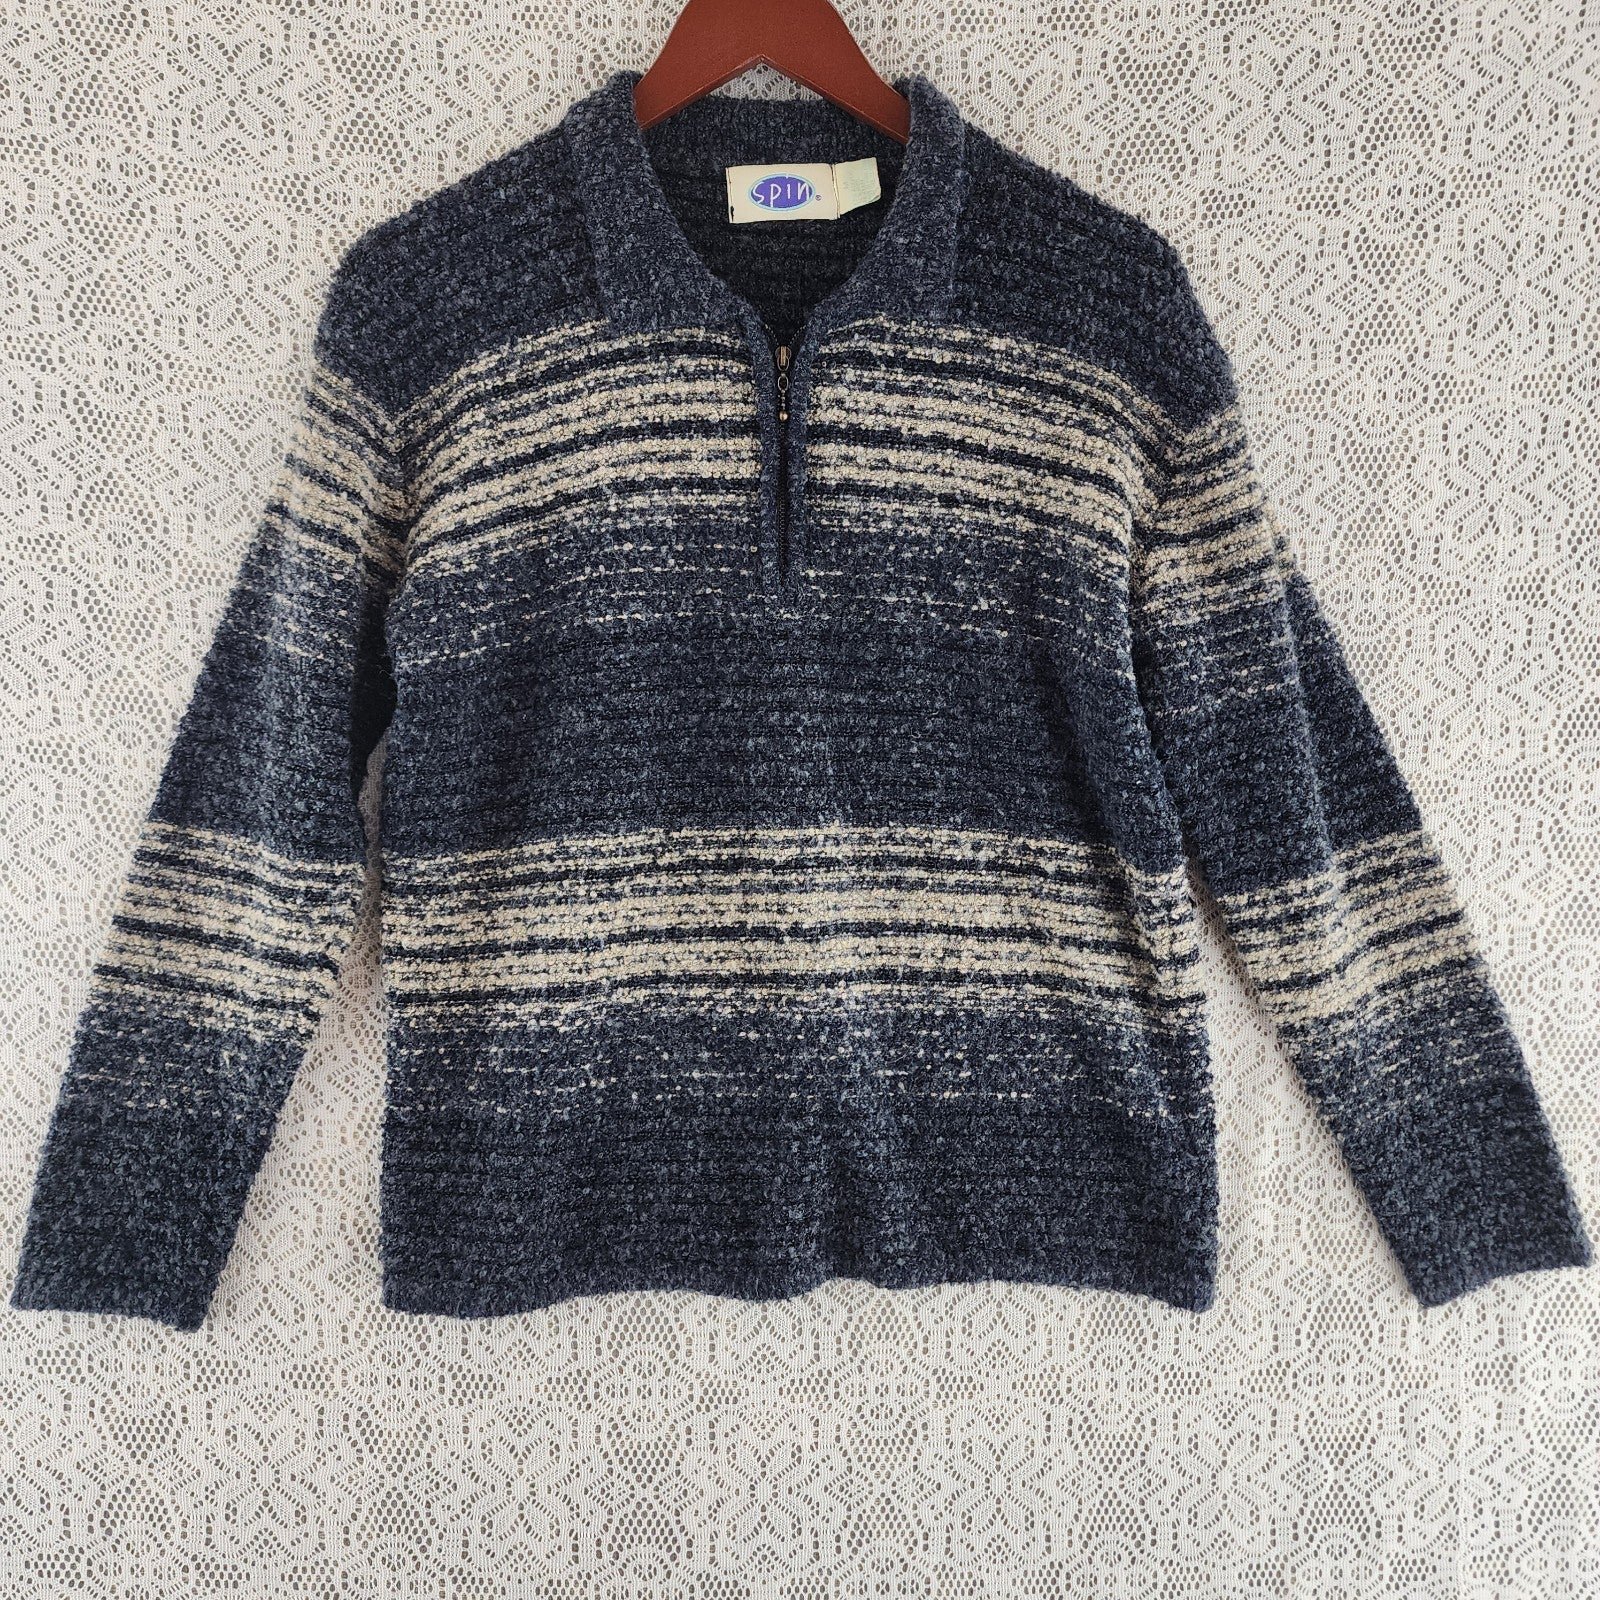 Gorgeous Vintage Spin Wool Blend Collar Pull Over Women